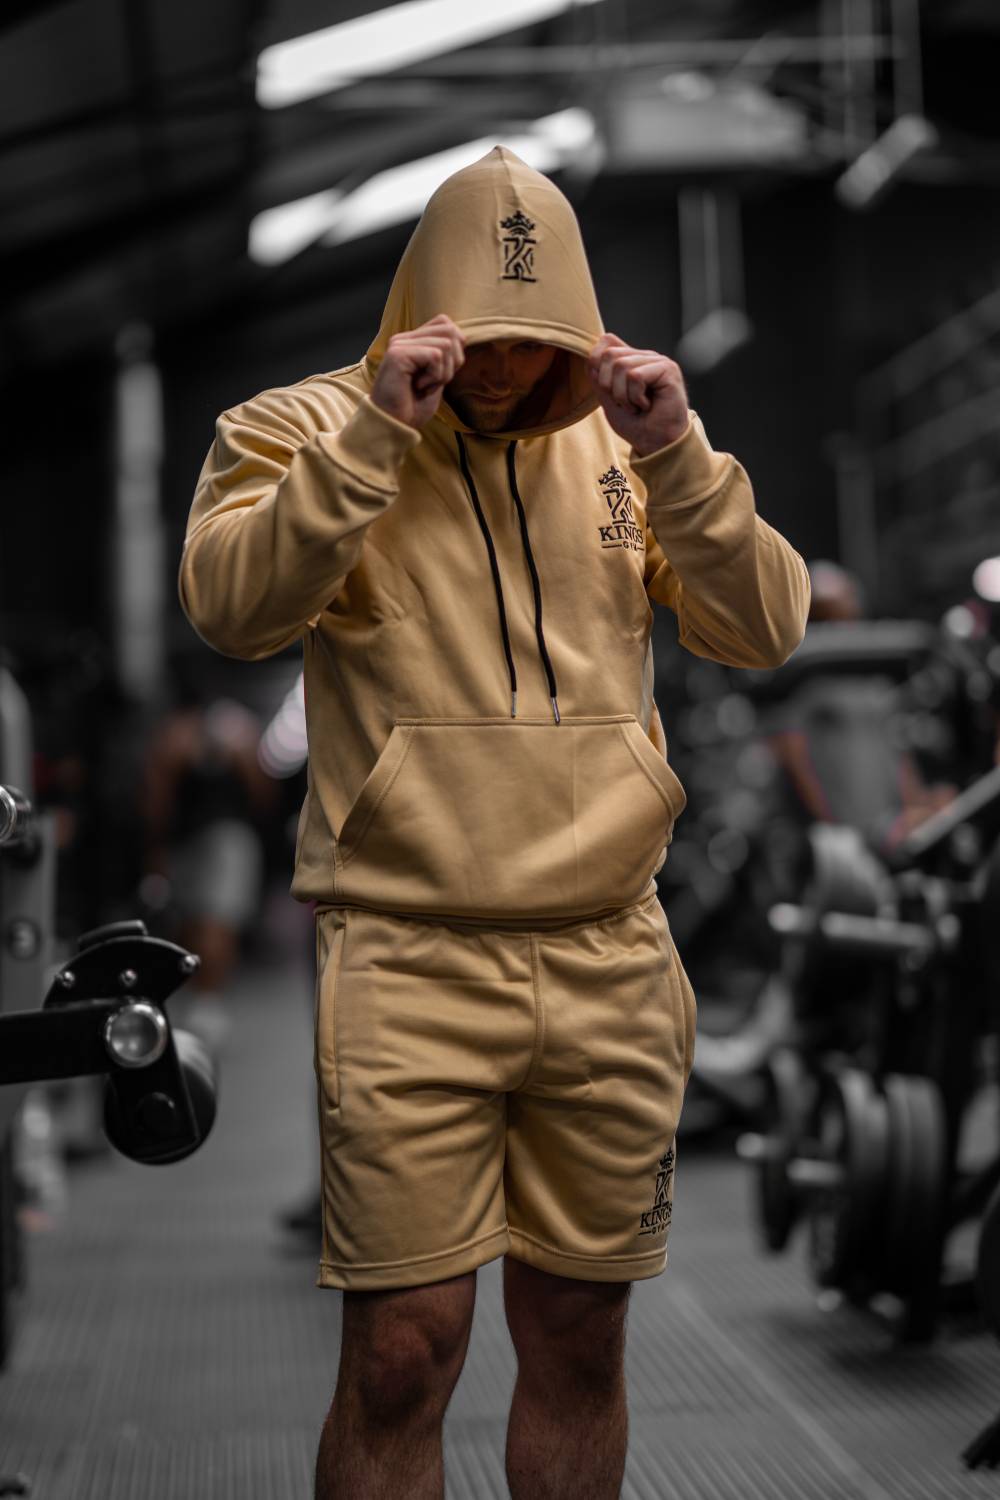 Kings Gym suit Set Front